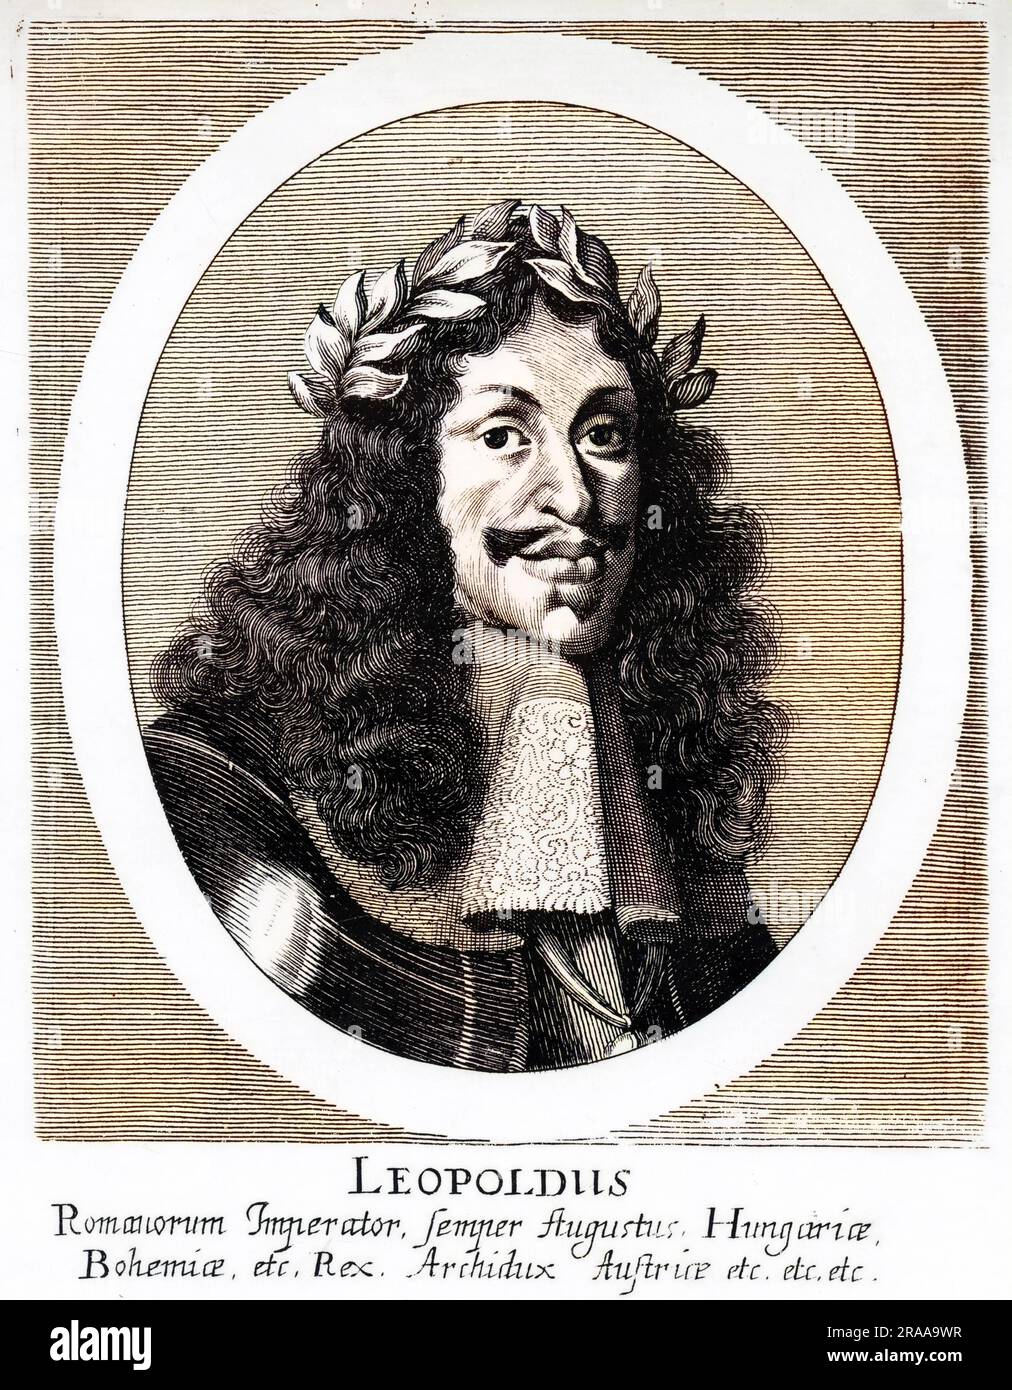 Leopold I (1640¹1705) - Holy Roman Emperor, King of Hungary and King of Bohemia. A member of the Habsburg family, he was the second son of Emperor Ferdinand III and his first wife, Maria Anna of Spain.     Date: circa 1675 Stock Photo